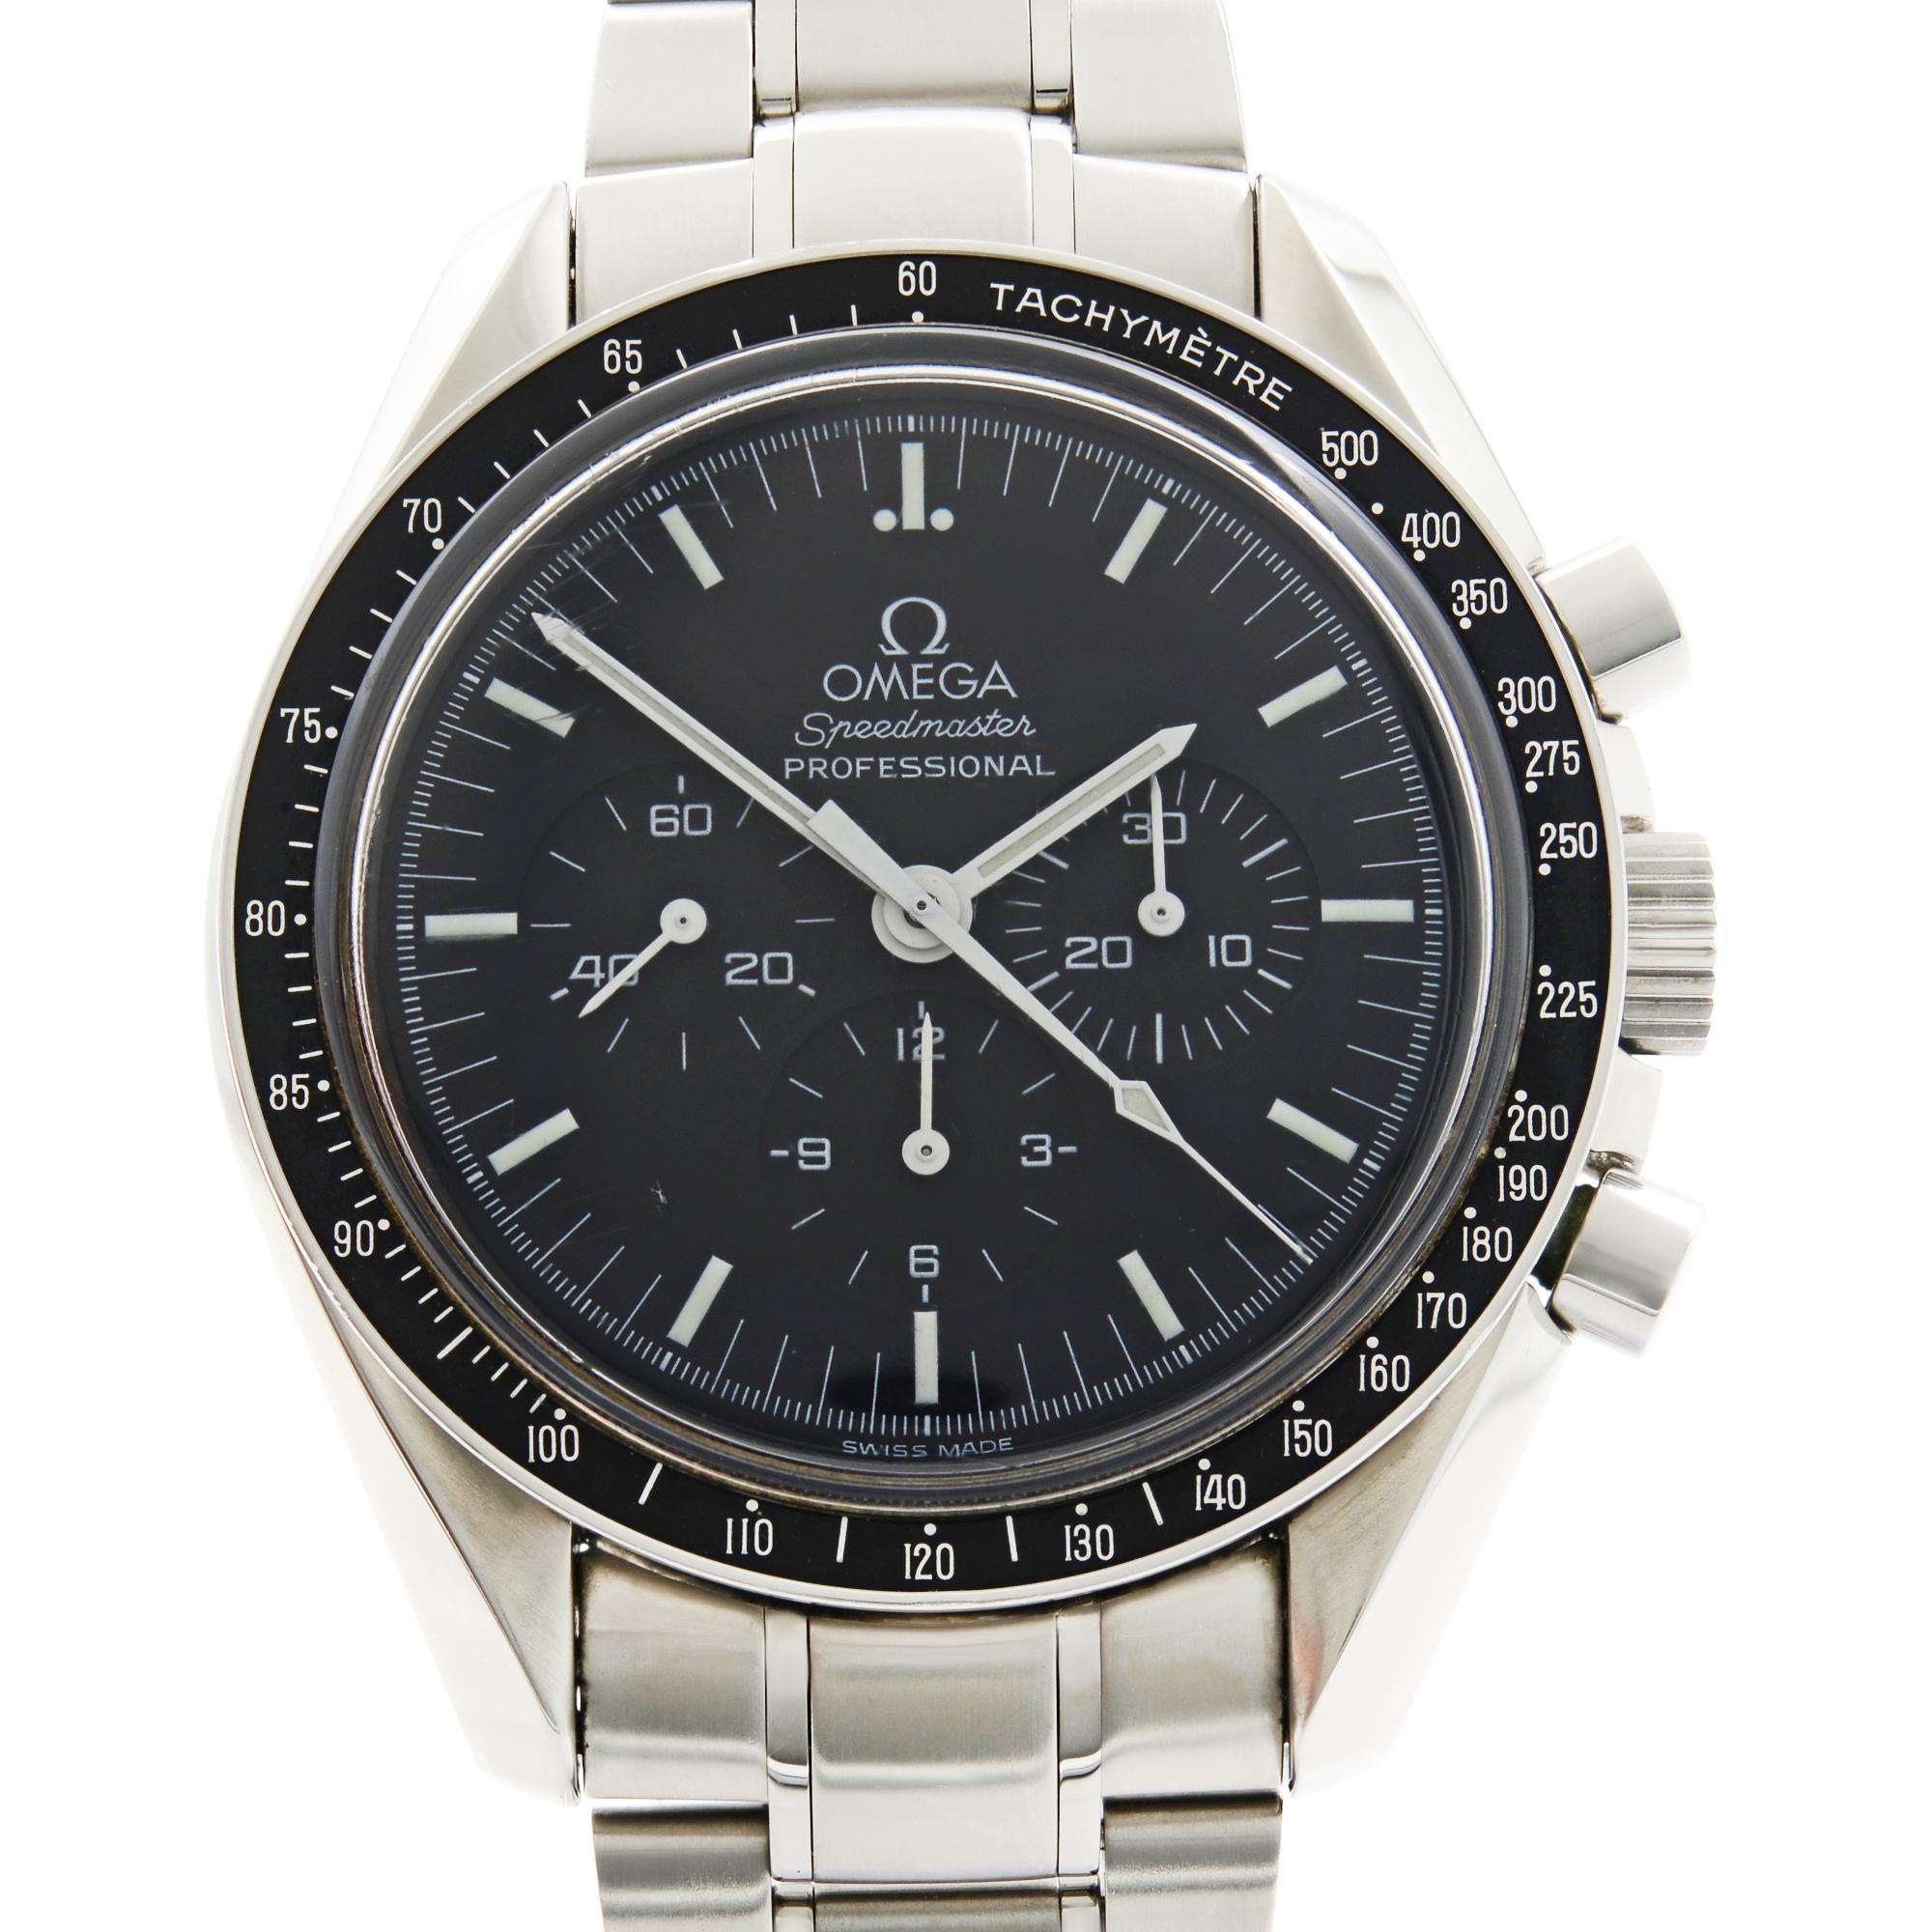 Pre-owned Omega Speedmaster Professional mens Watch. Comes without the manufacturer's box and papers. 
Details:
MSRP 5500
Brand OMEGA 
Color Steel
Department Men
Model Number 3573.50.00
Model Omega Speedmaster
Style Sport
Movement Mechanical